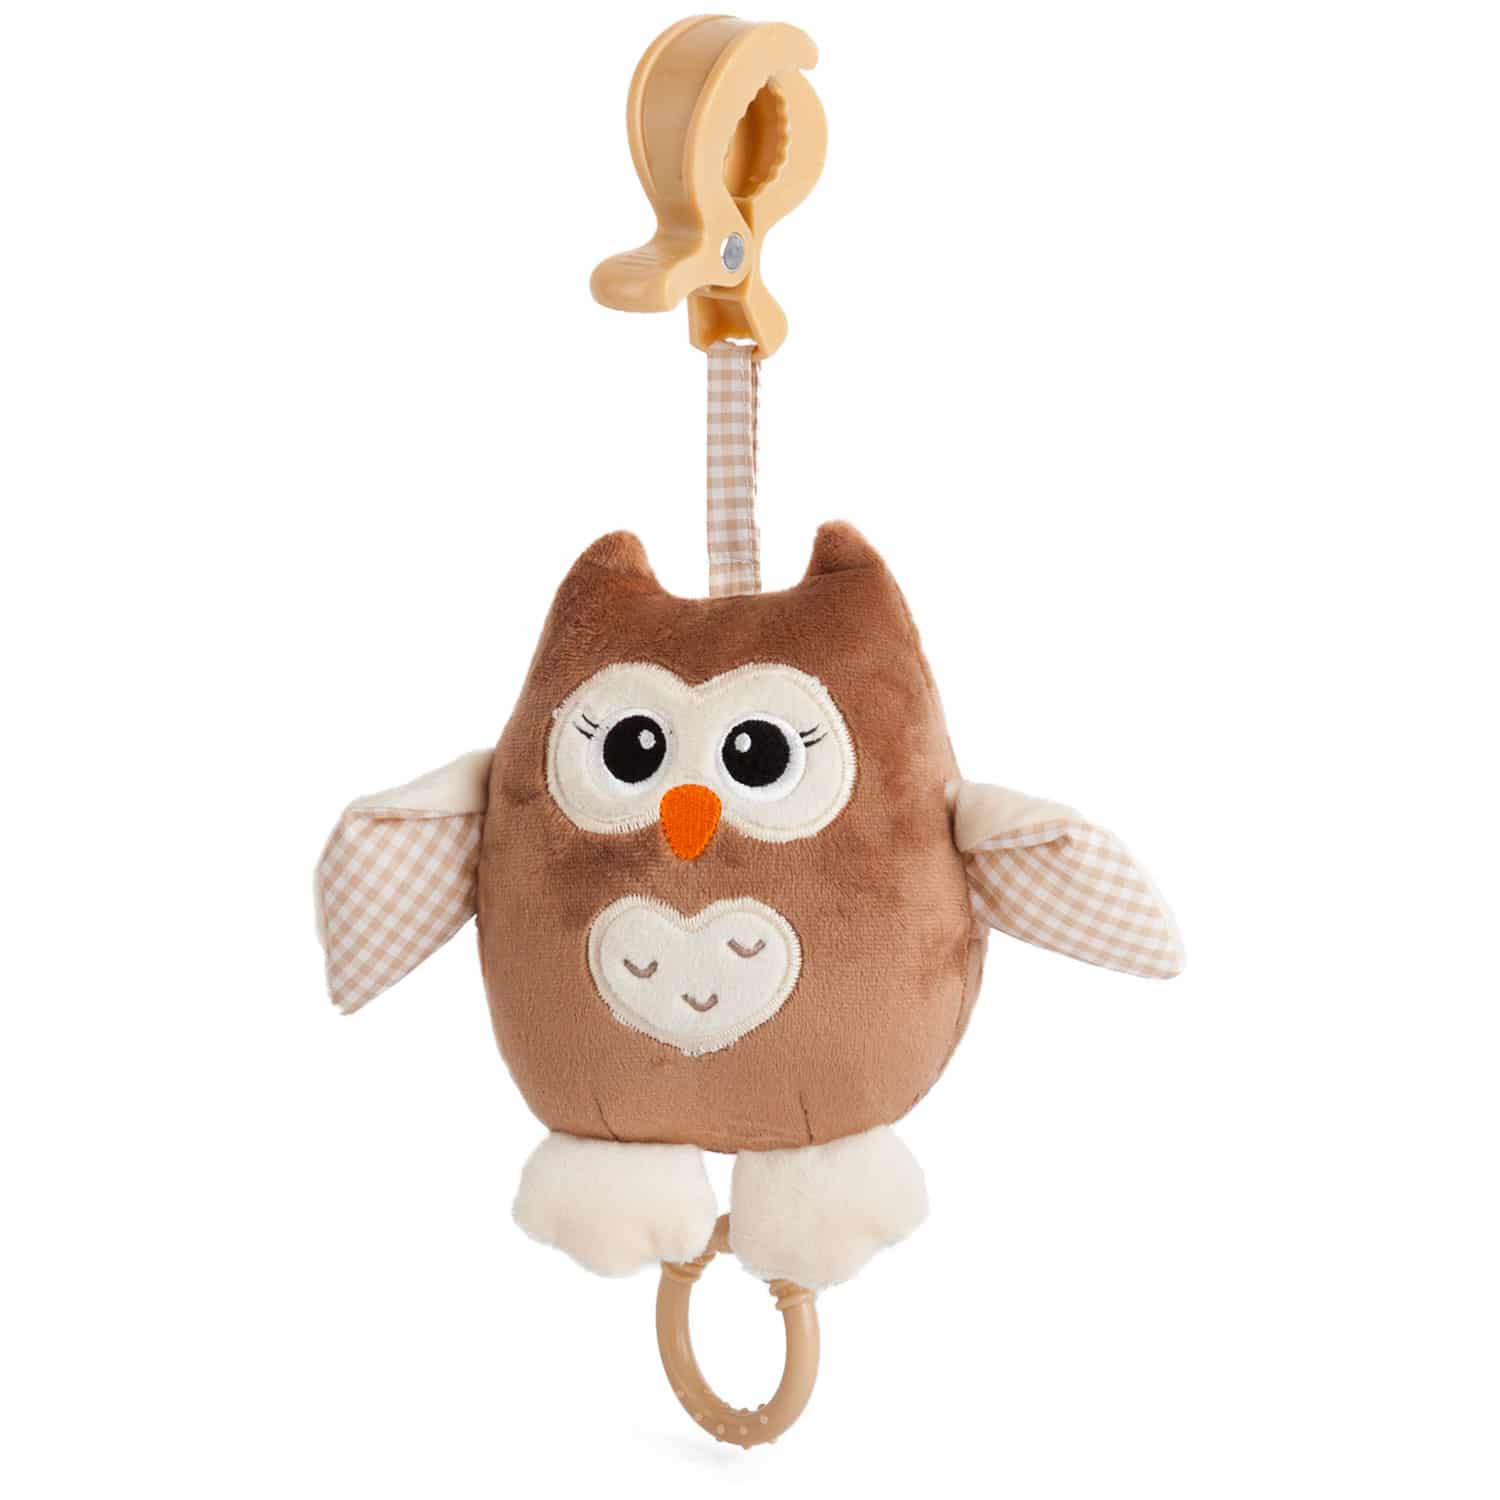 Musical toy Owl - Brown